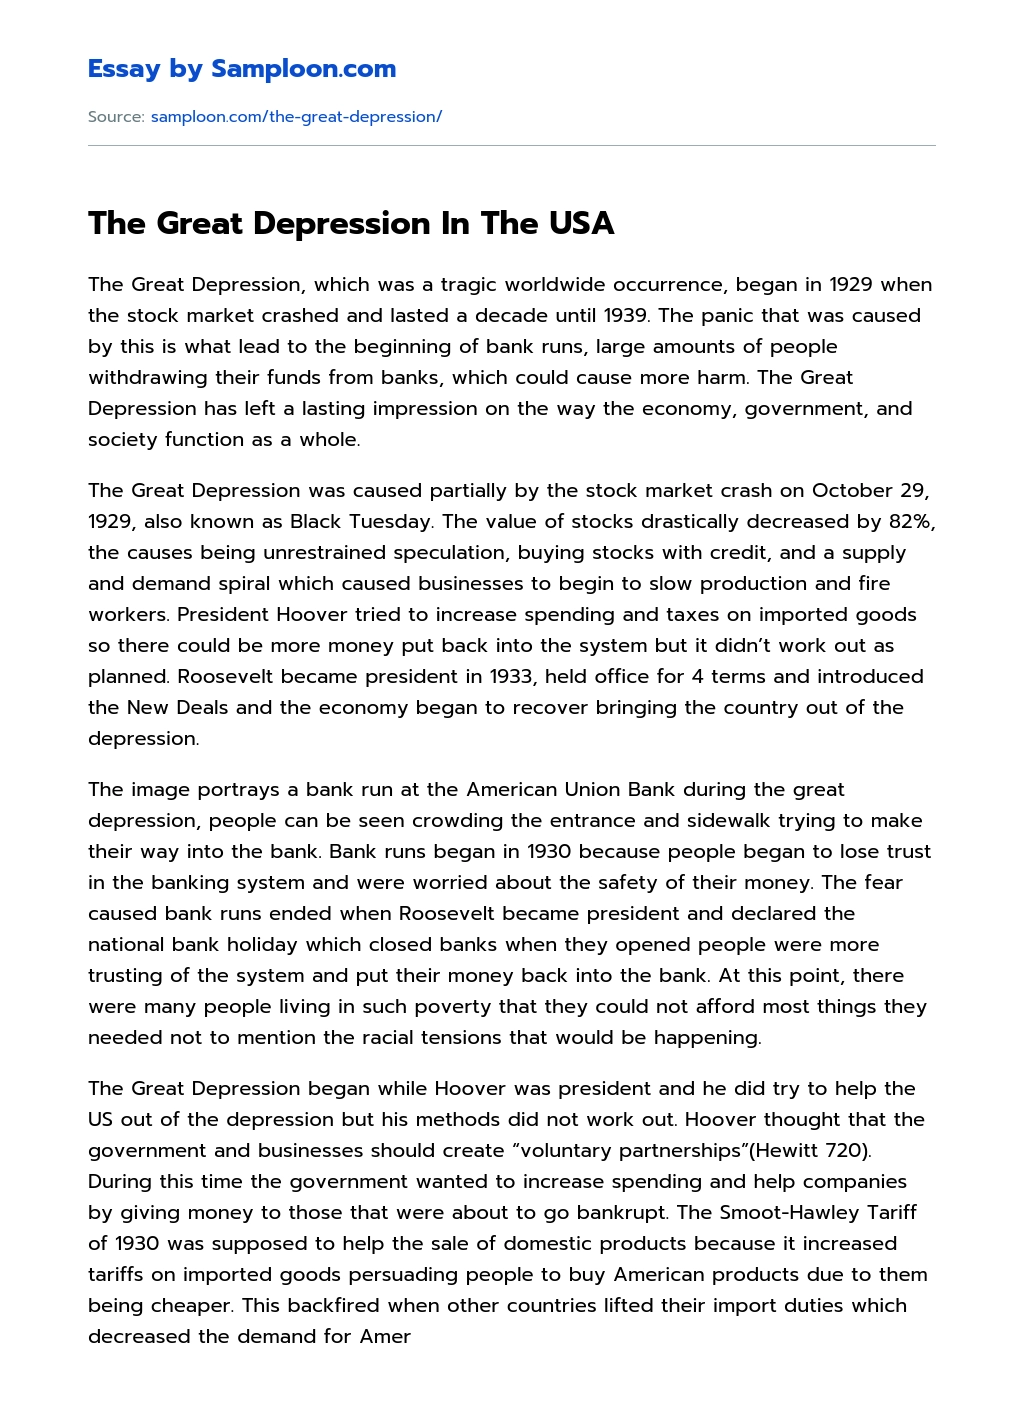 The Great Depression In The USA essay